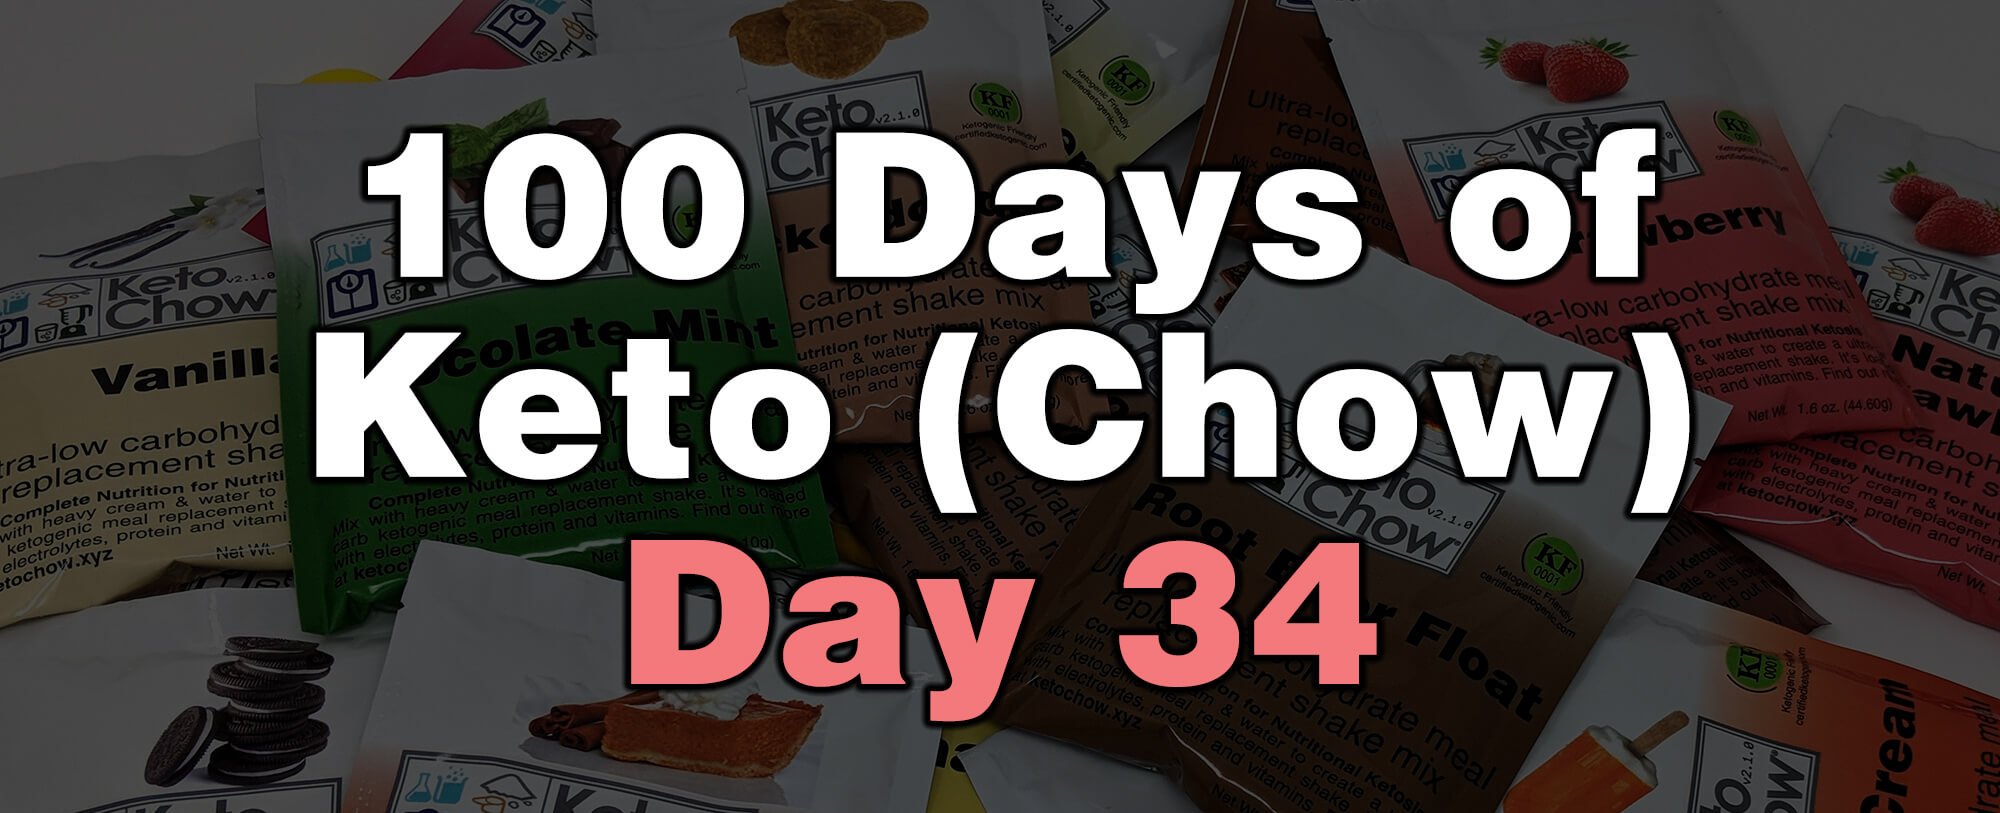 100 days of keto chow day 34